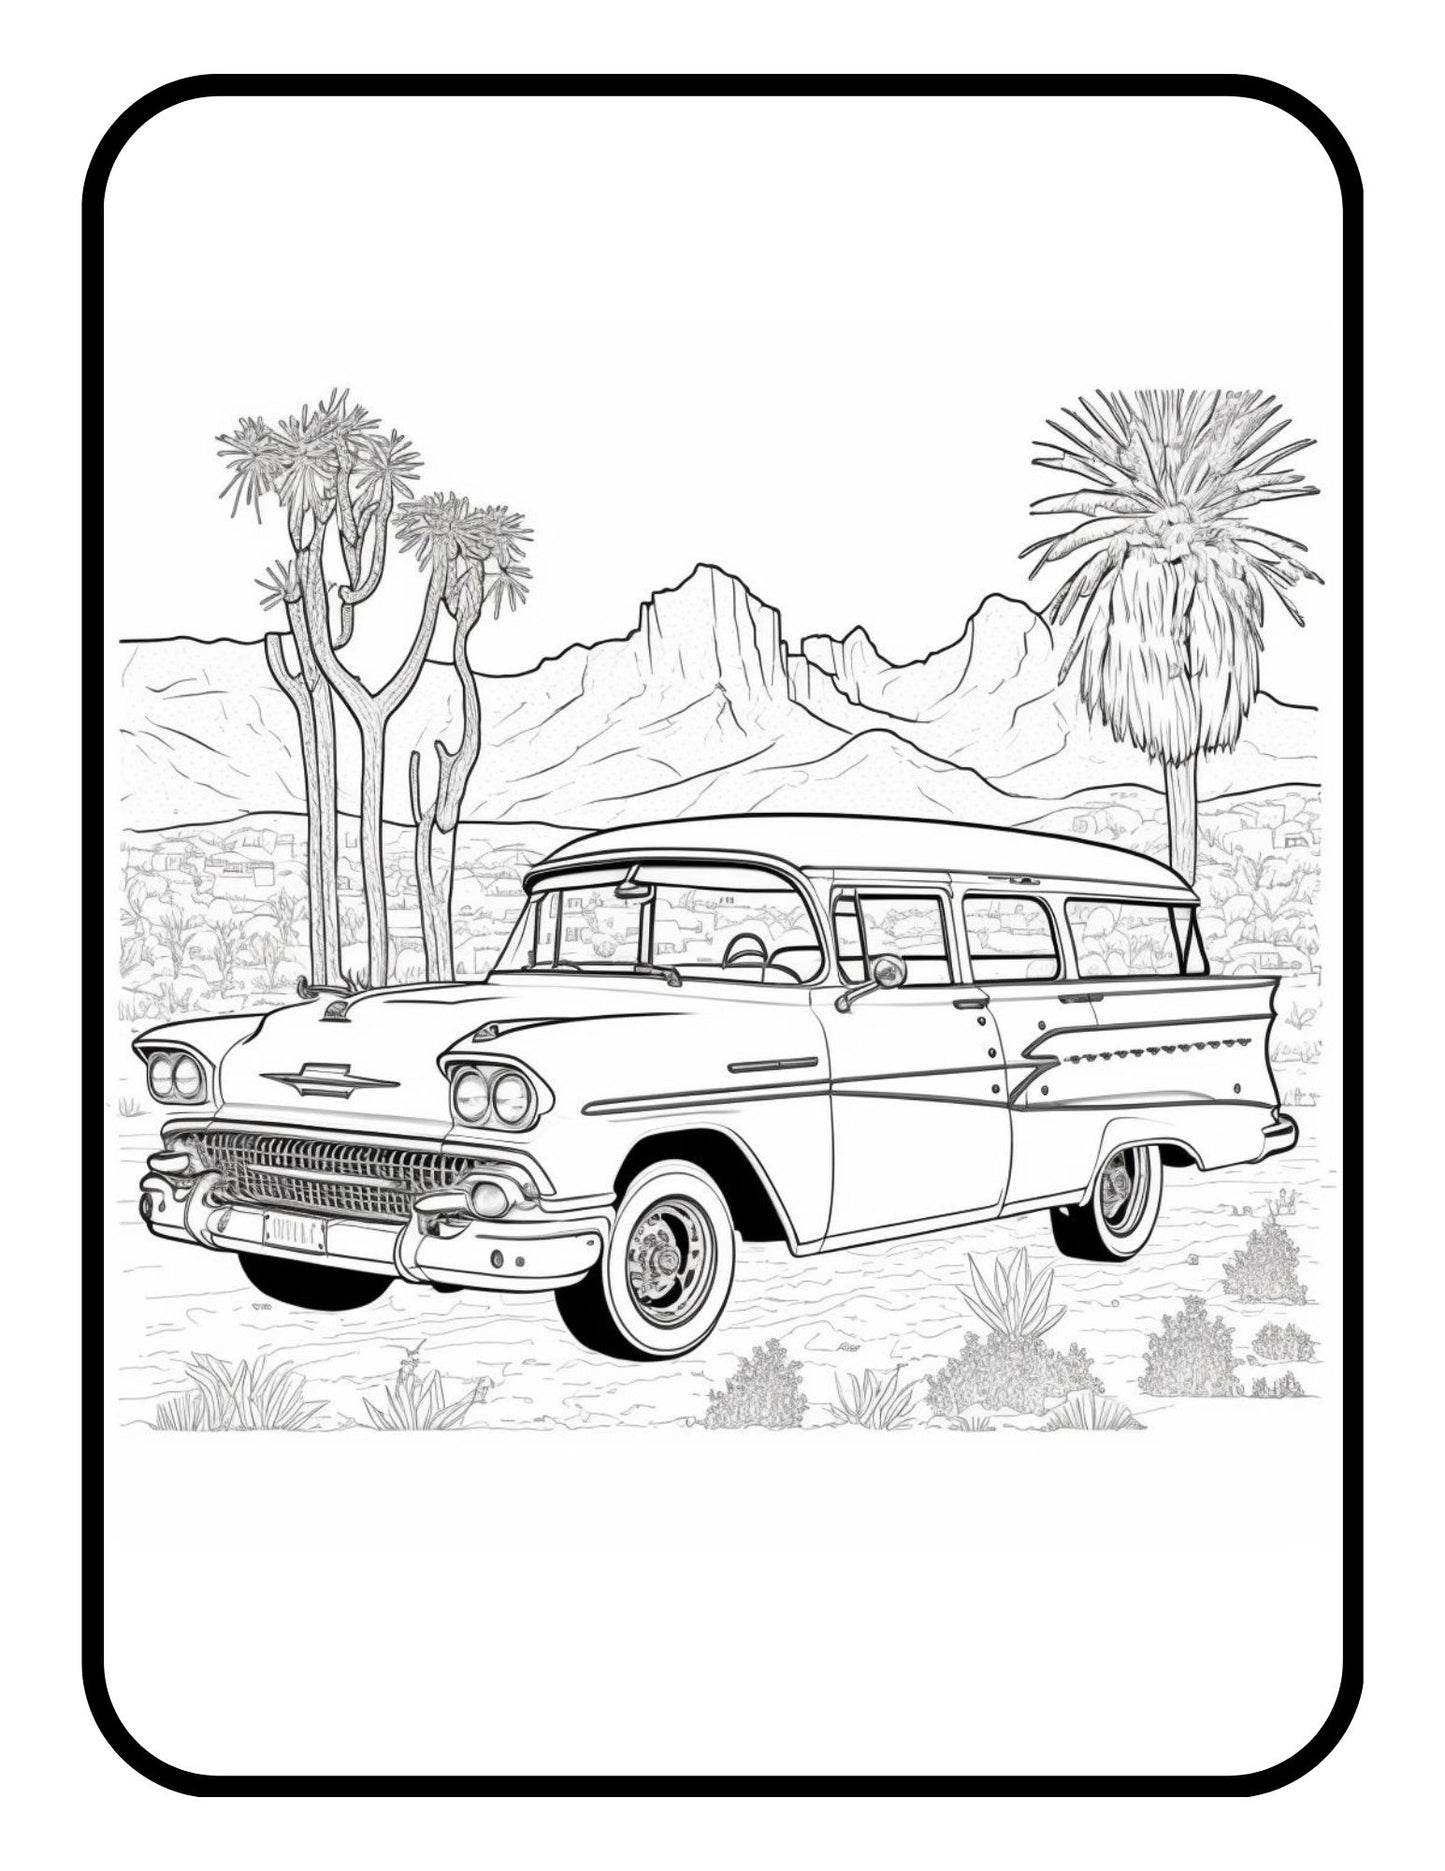 Vintage Classic Old Enthusiast Car Coloring Book Exotic Race Car For Men Classic Car Coloring Book For Adults Dream Vintage Coloring Book